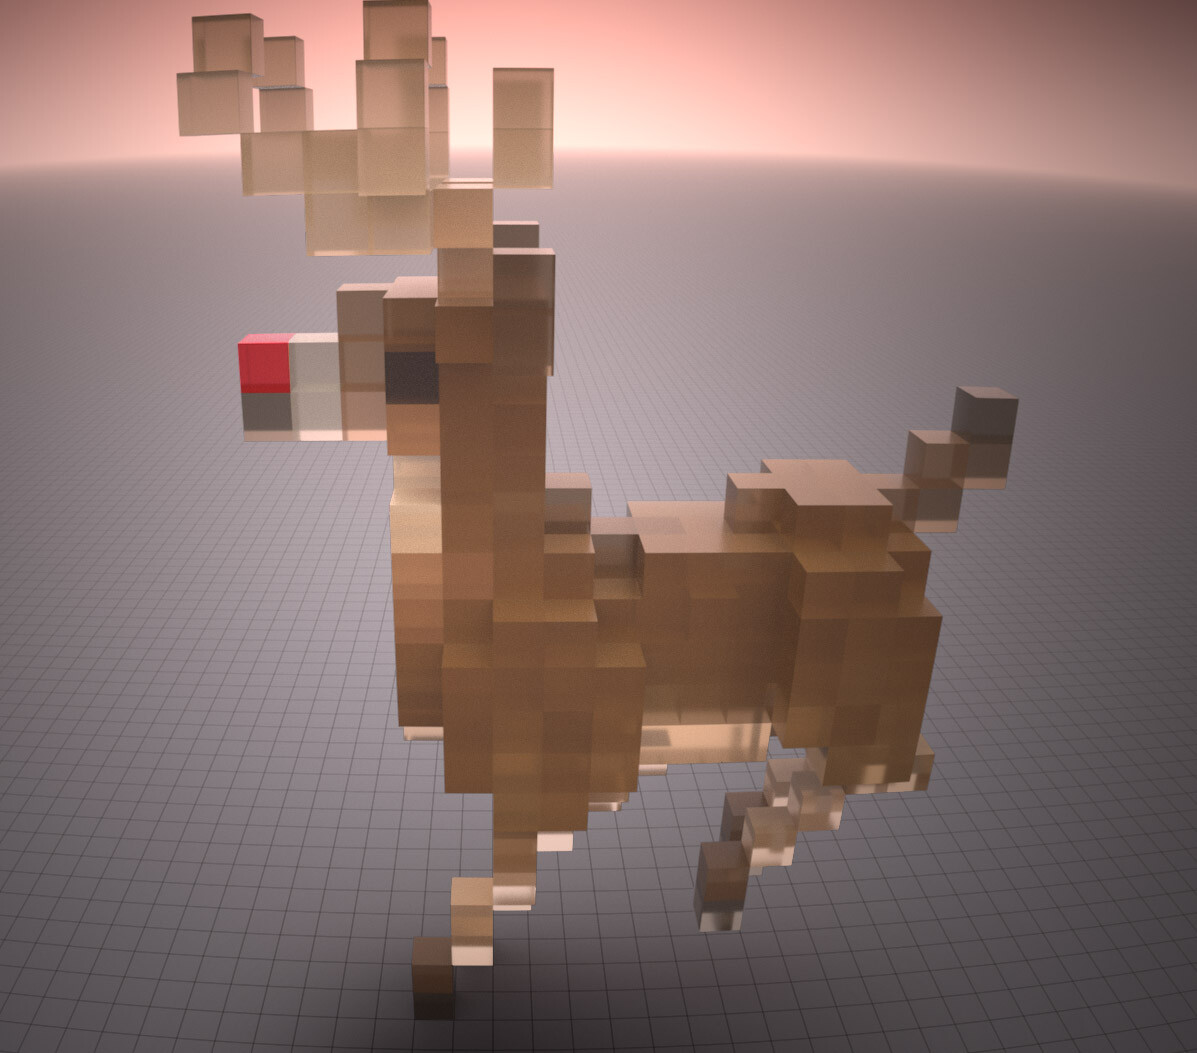 voxel render test for fun